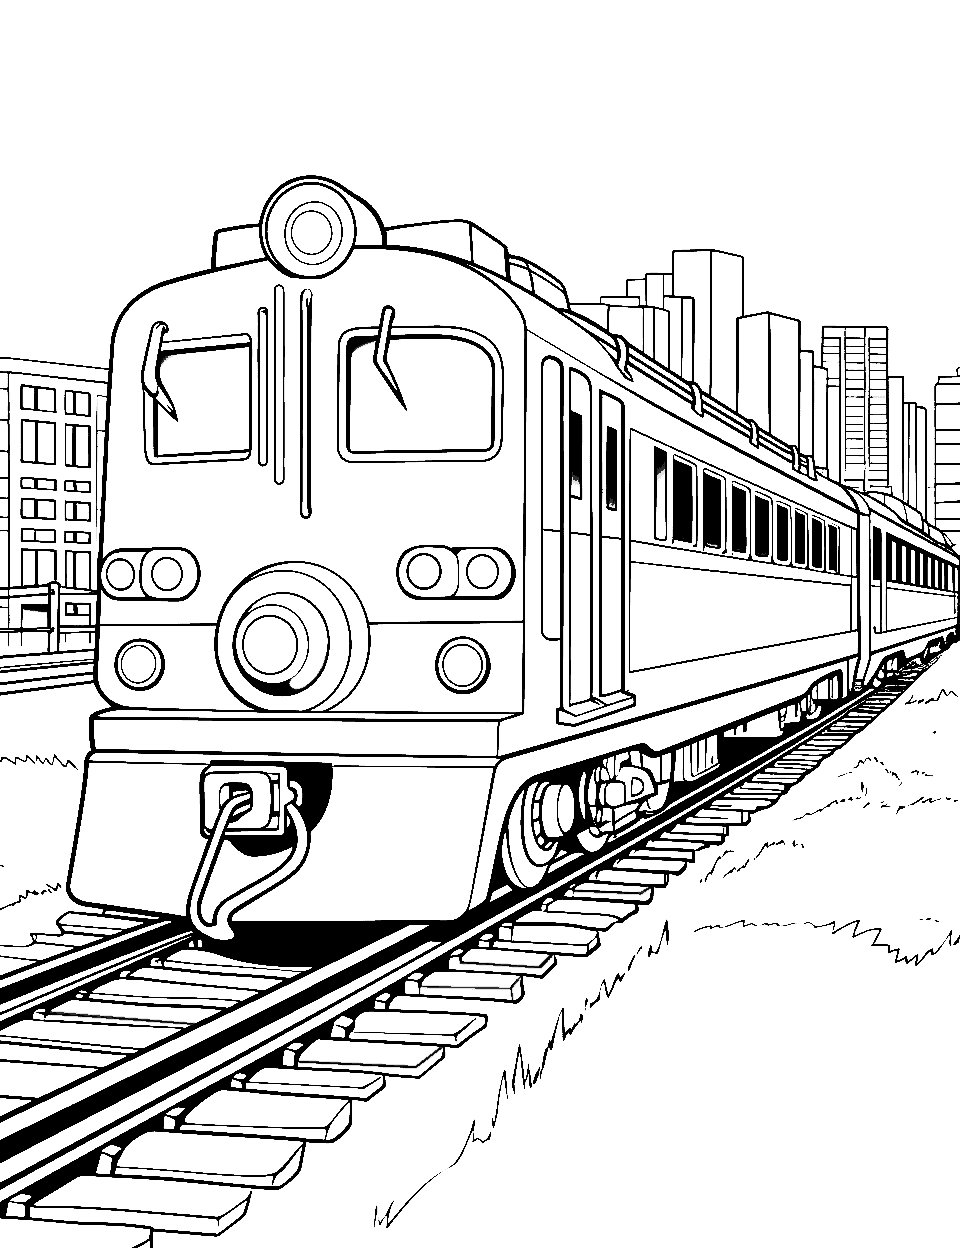 Transport Through the City Train Coloring Page - A modern city train moving between skyscrapers.